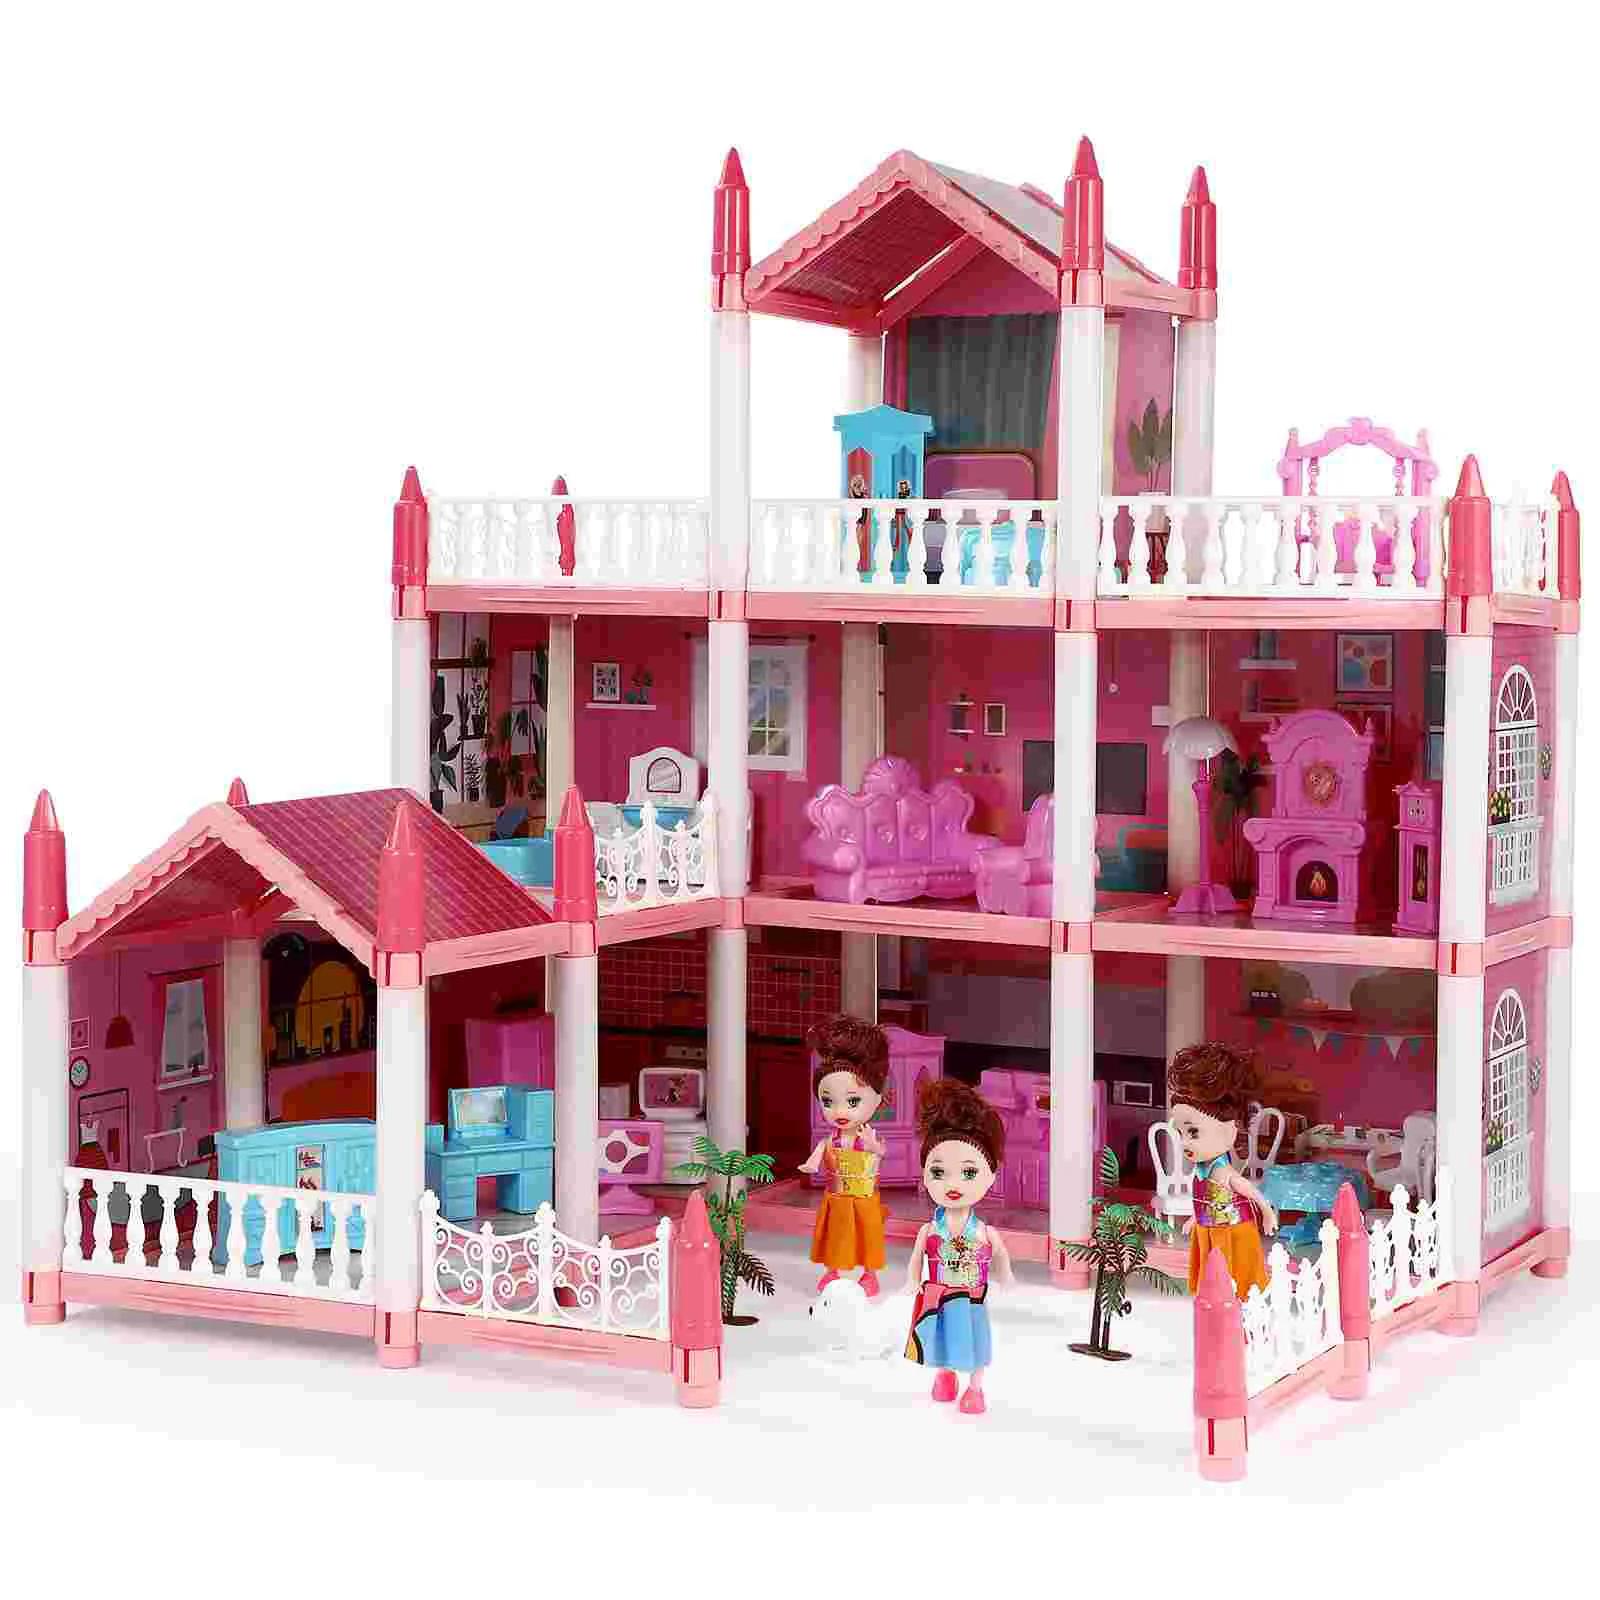 Girl Children's Play House Toy Girl's Imitation 9 Rooms Pink Princess Toys Pp With 3 Stories